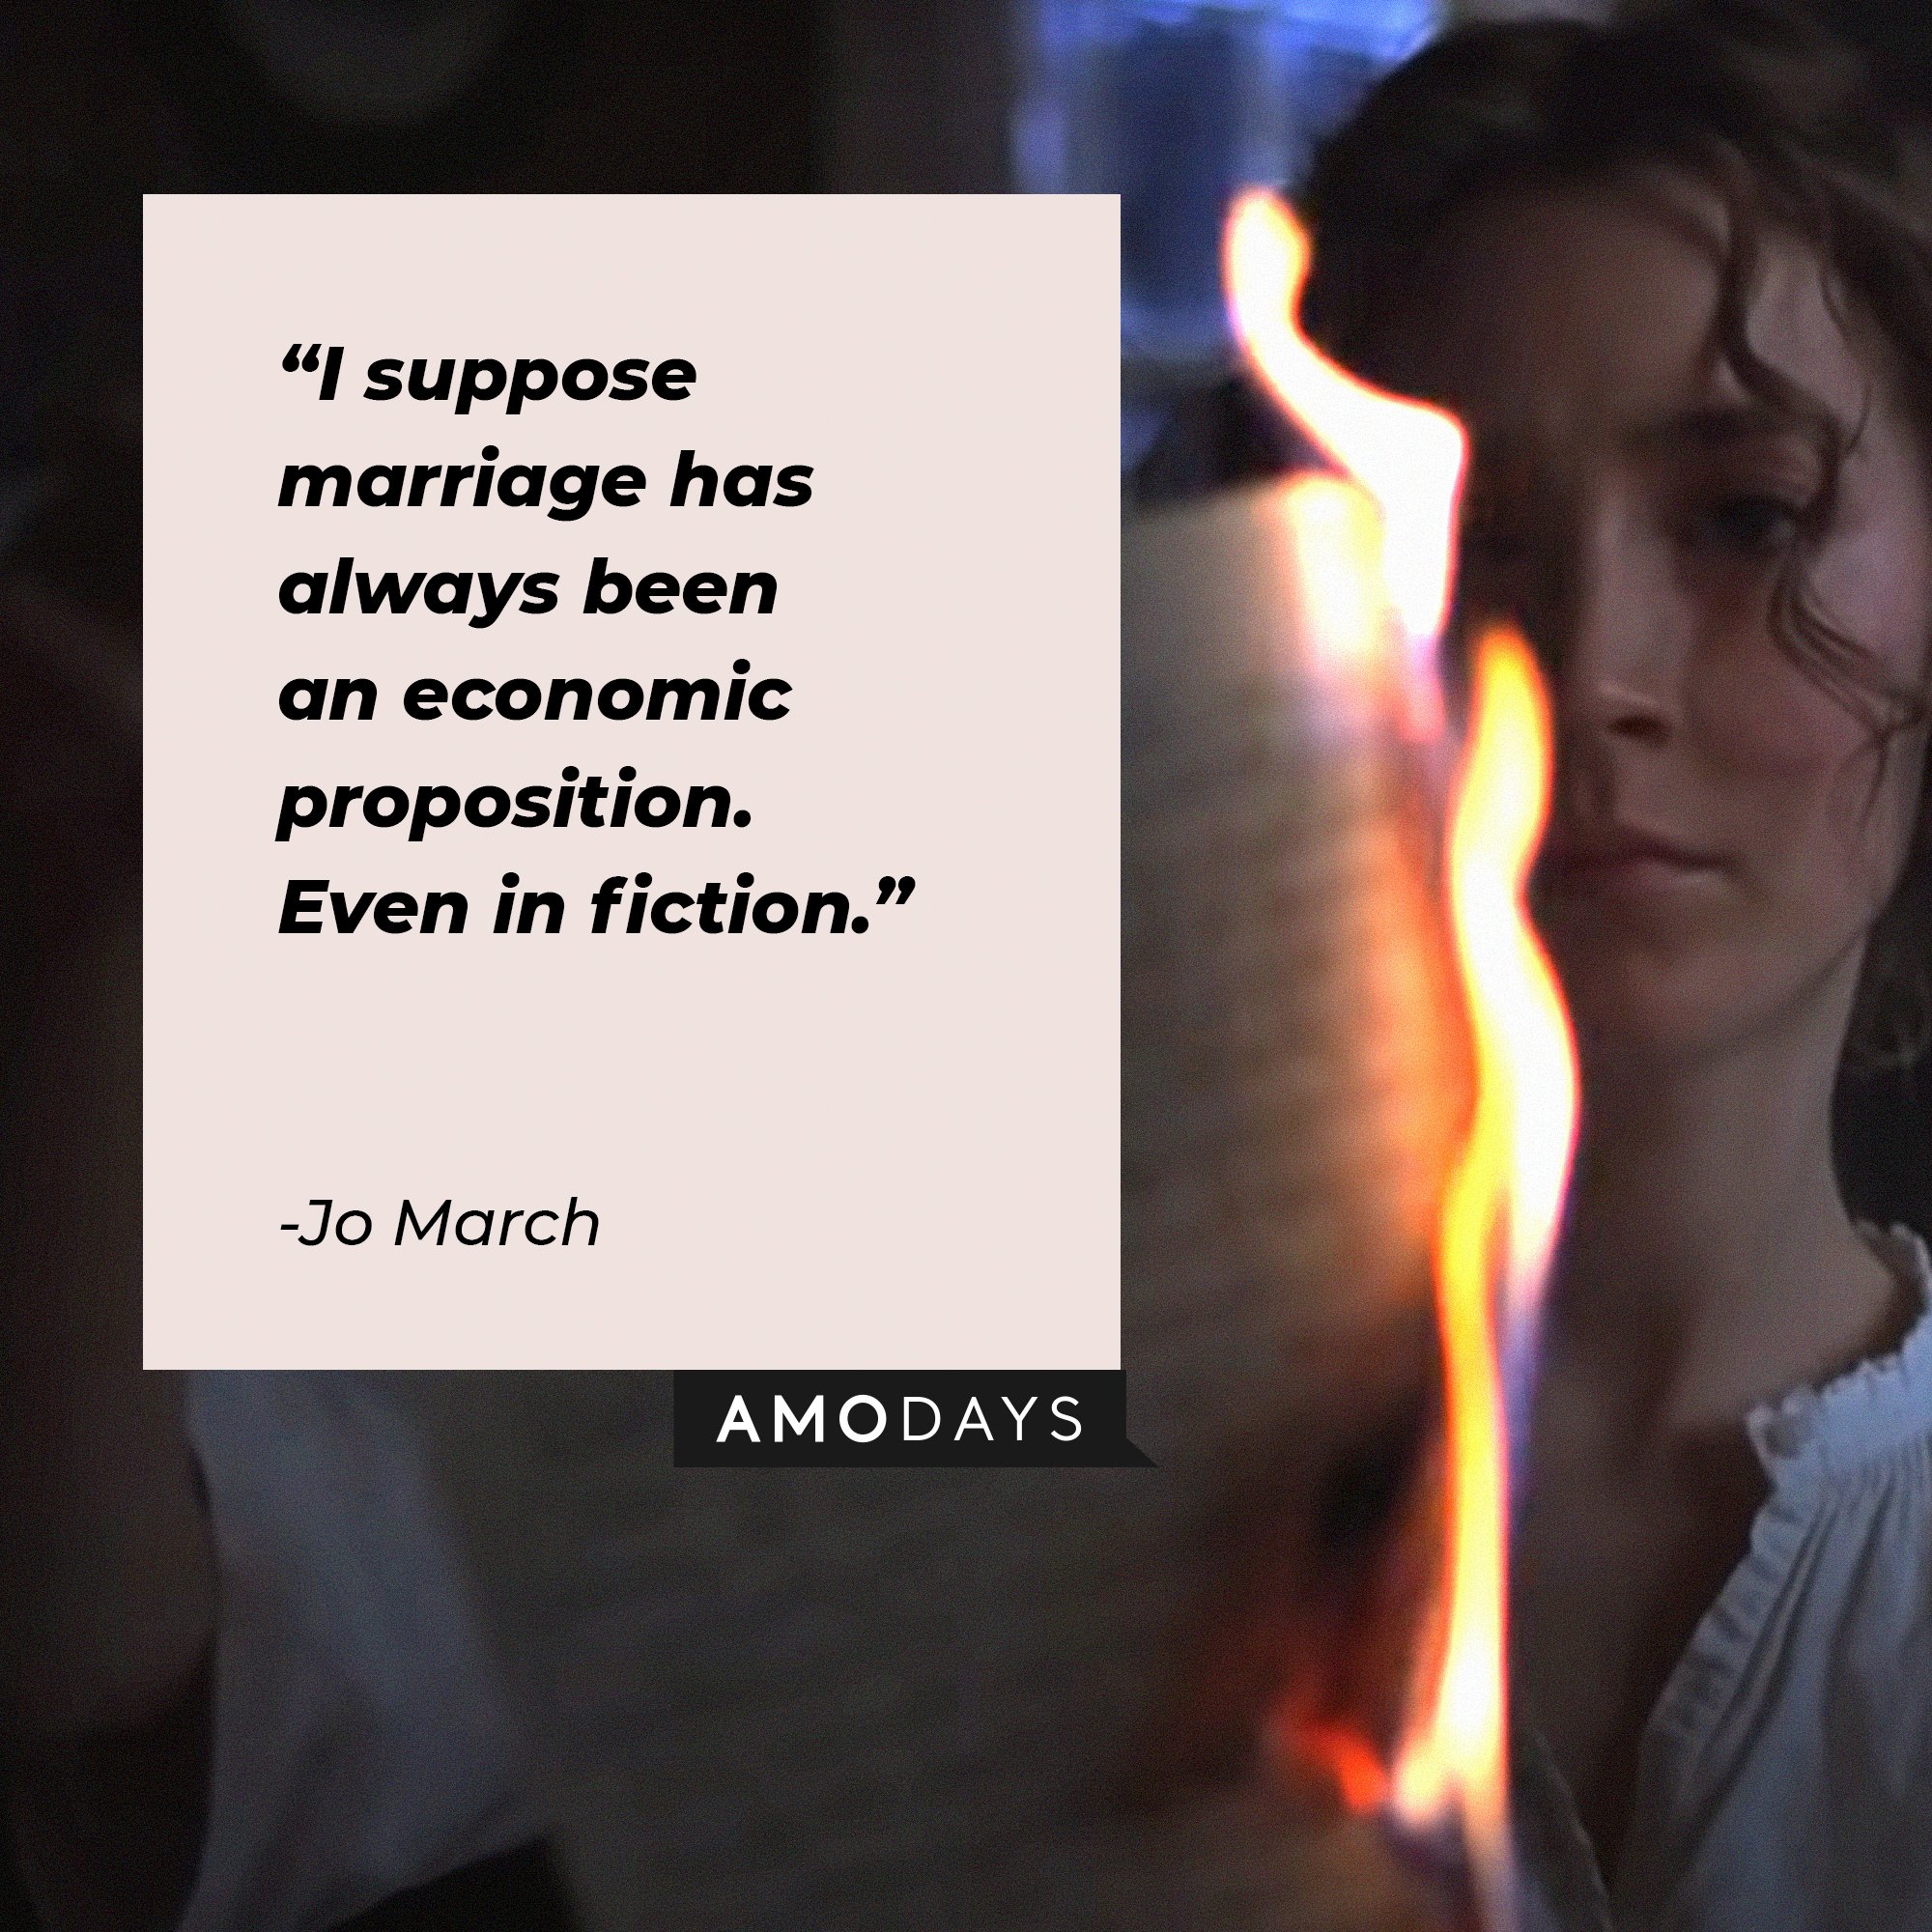 Jo March’s quote: “I suppose marriage has always been an economic proposition. Even in fiction.” | Image: AmoDays